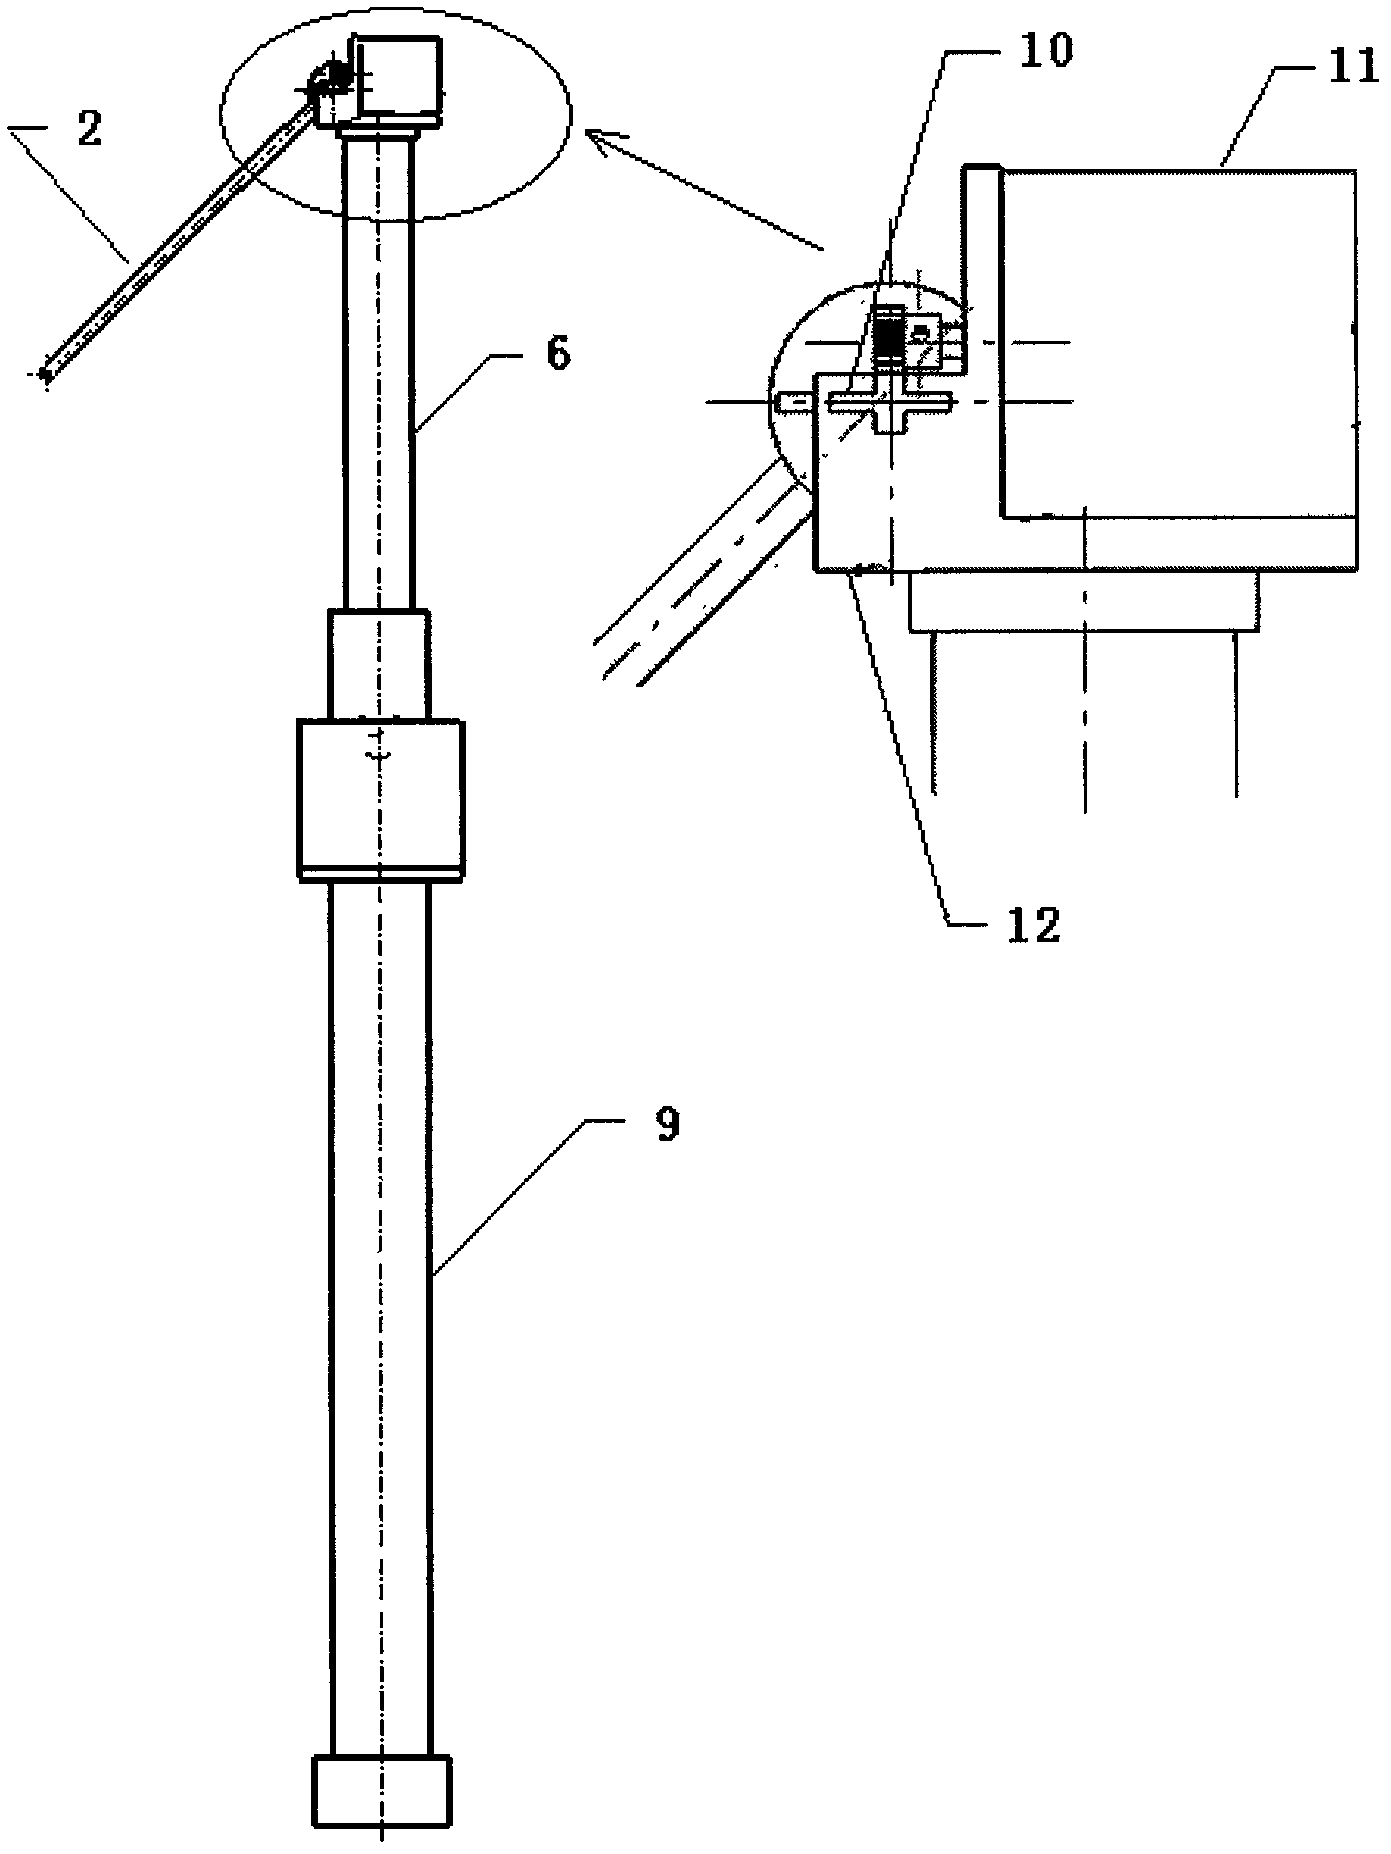 Eye muscle exercise device and method